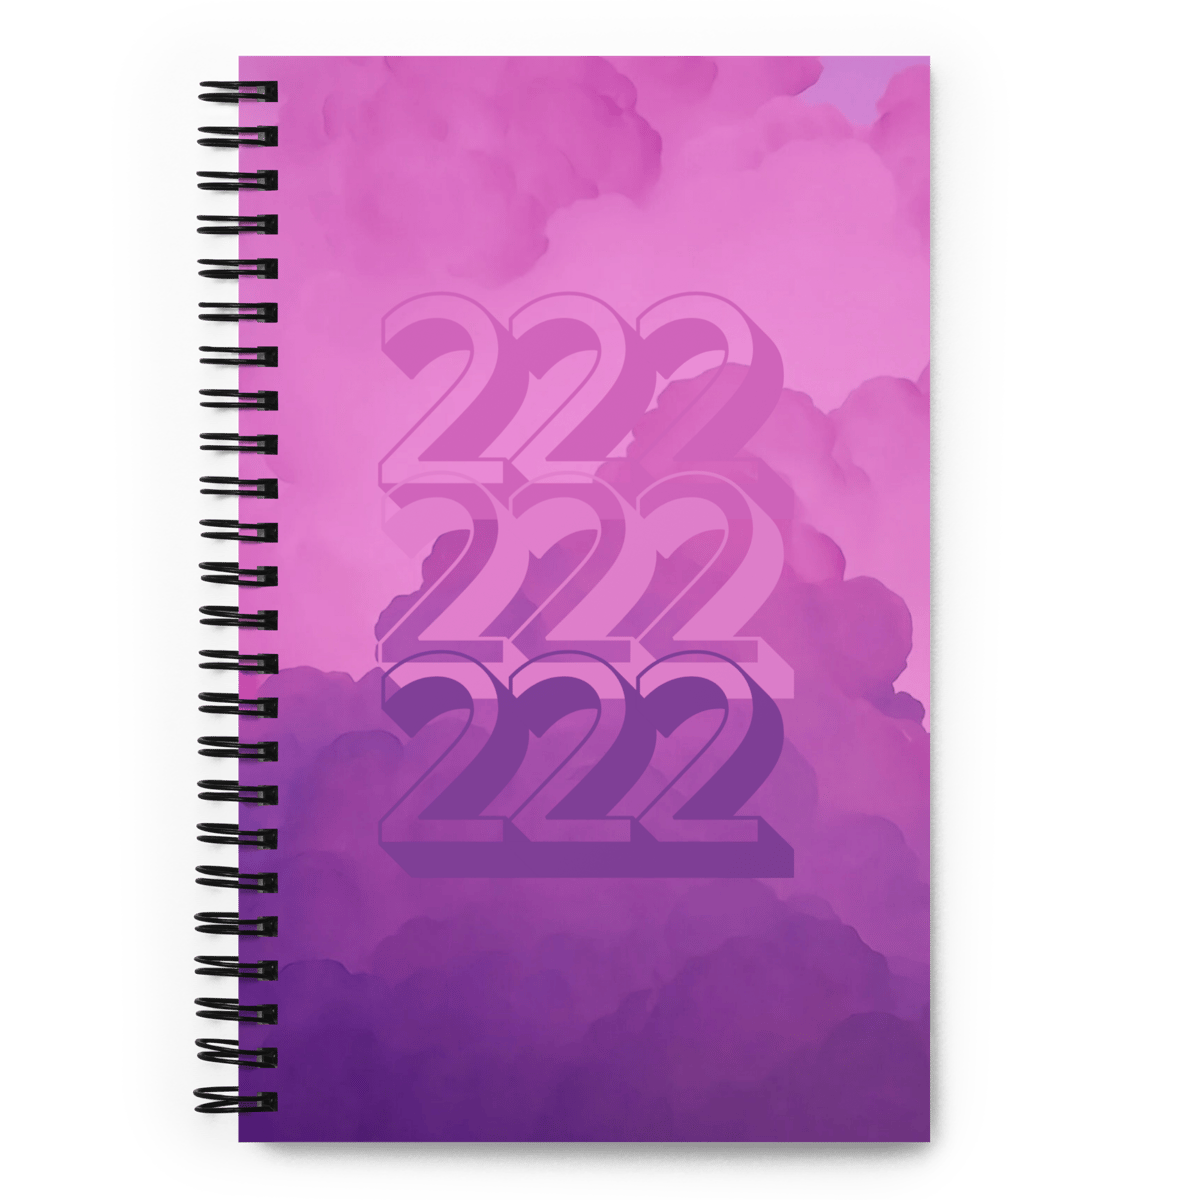 Image of 222 Spiral Notebook